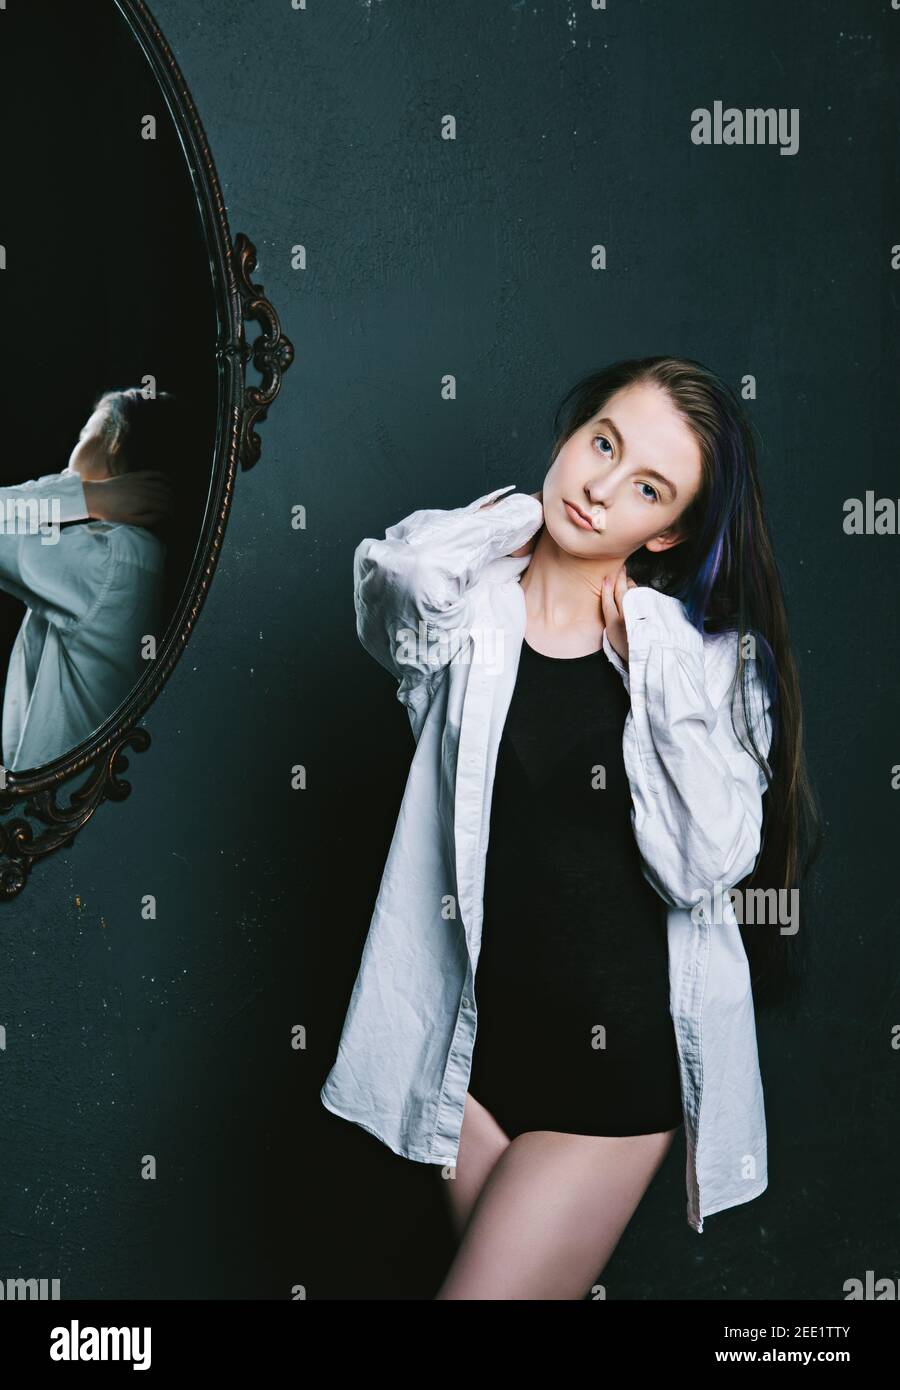 beautiful model wearing a white shirt in an old building with a mirror Stock Photo